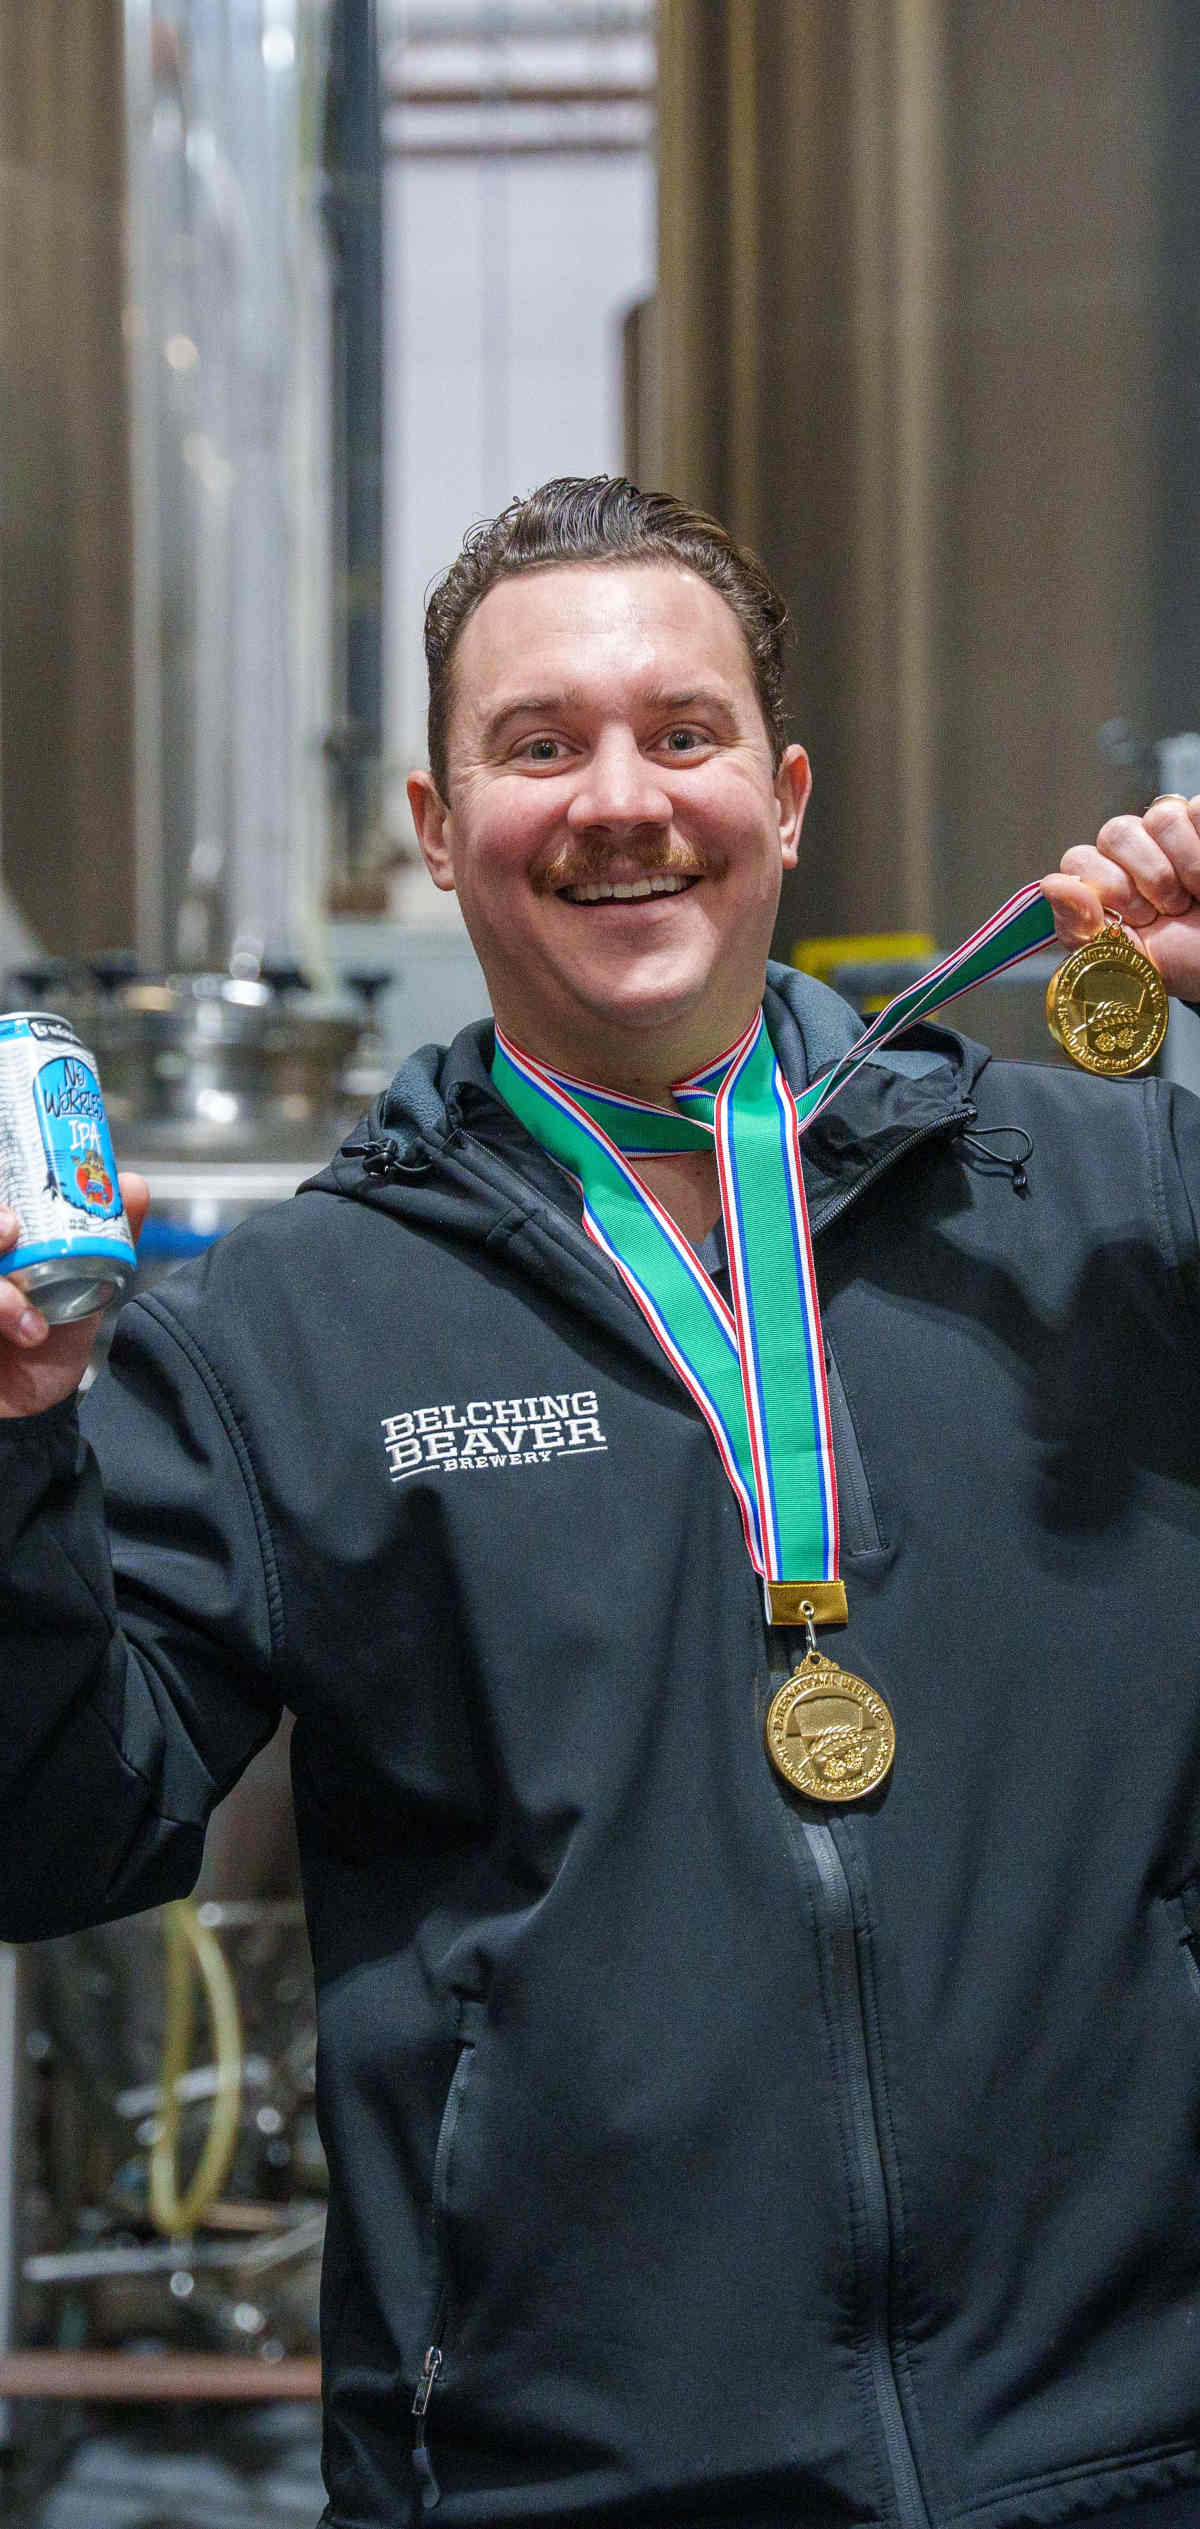 Brewer Troy showing medals and a can of beer.